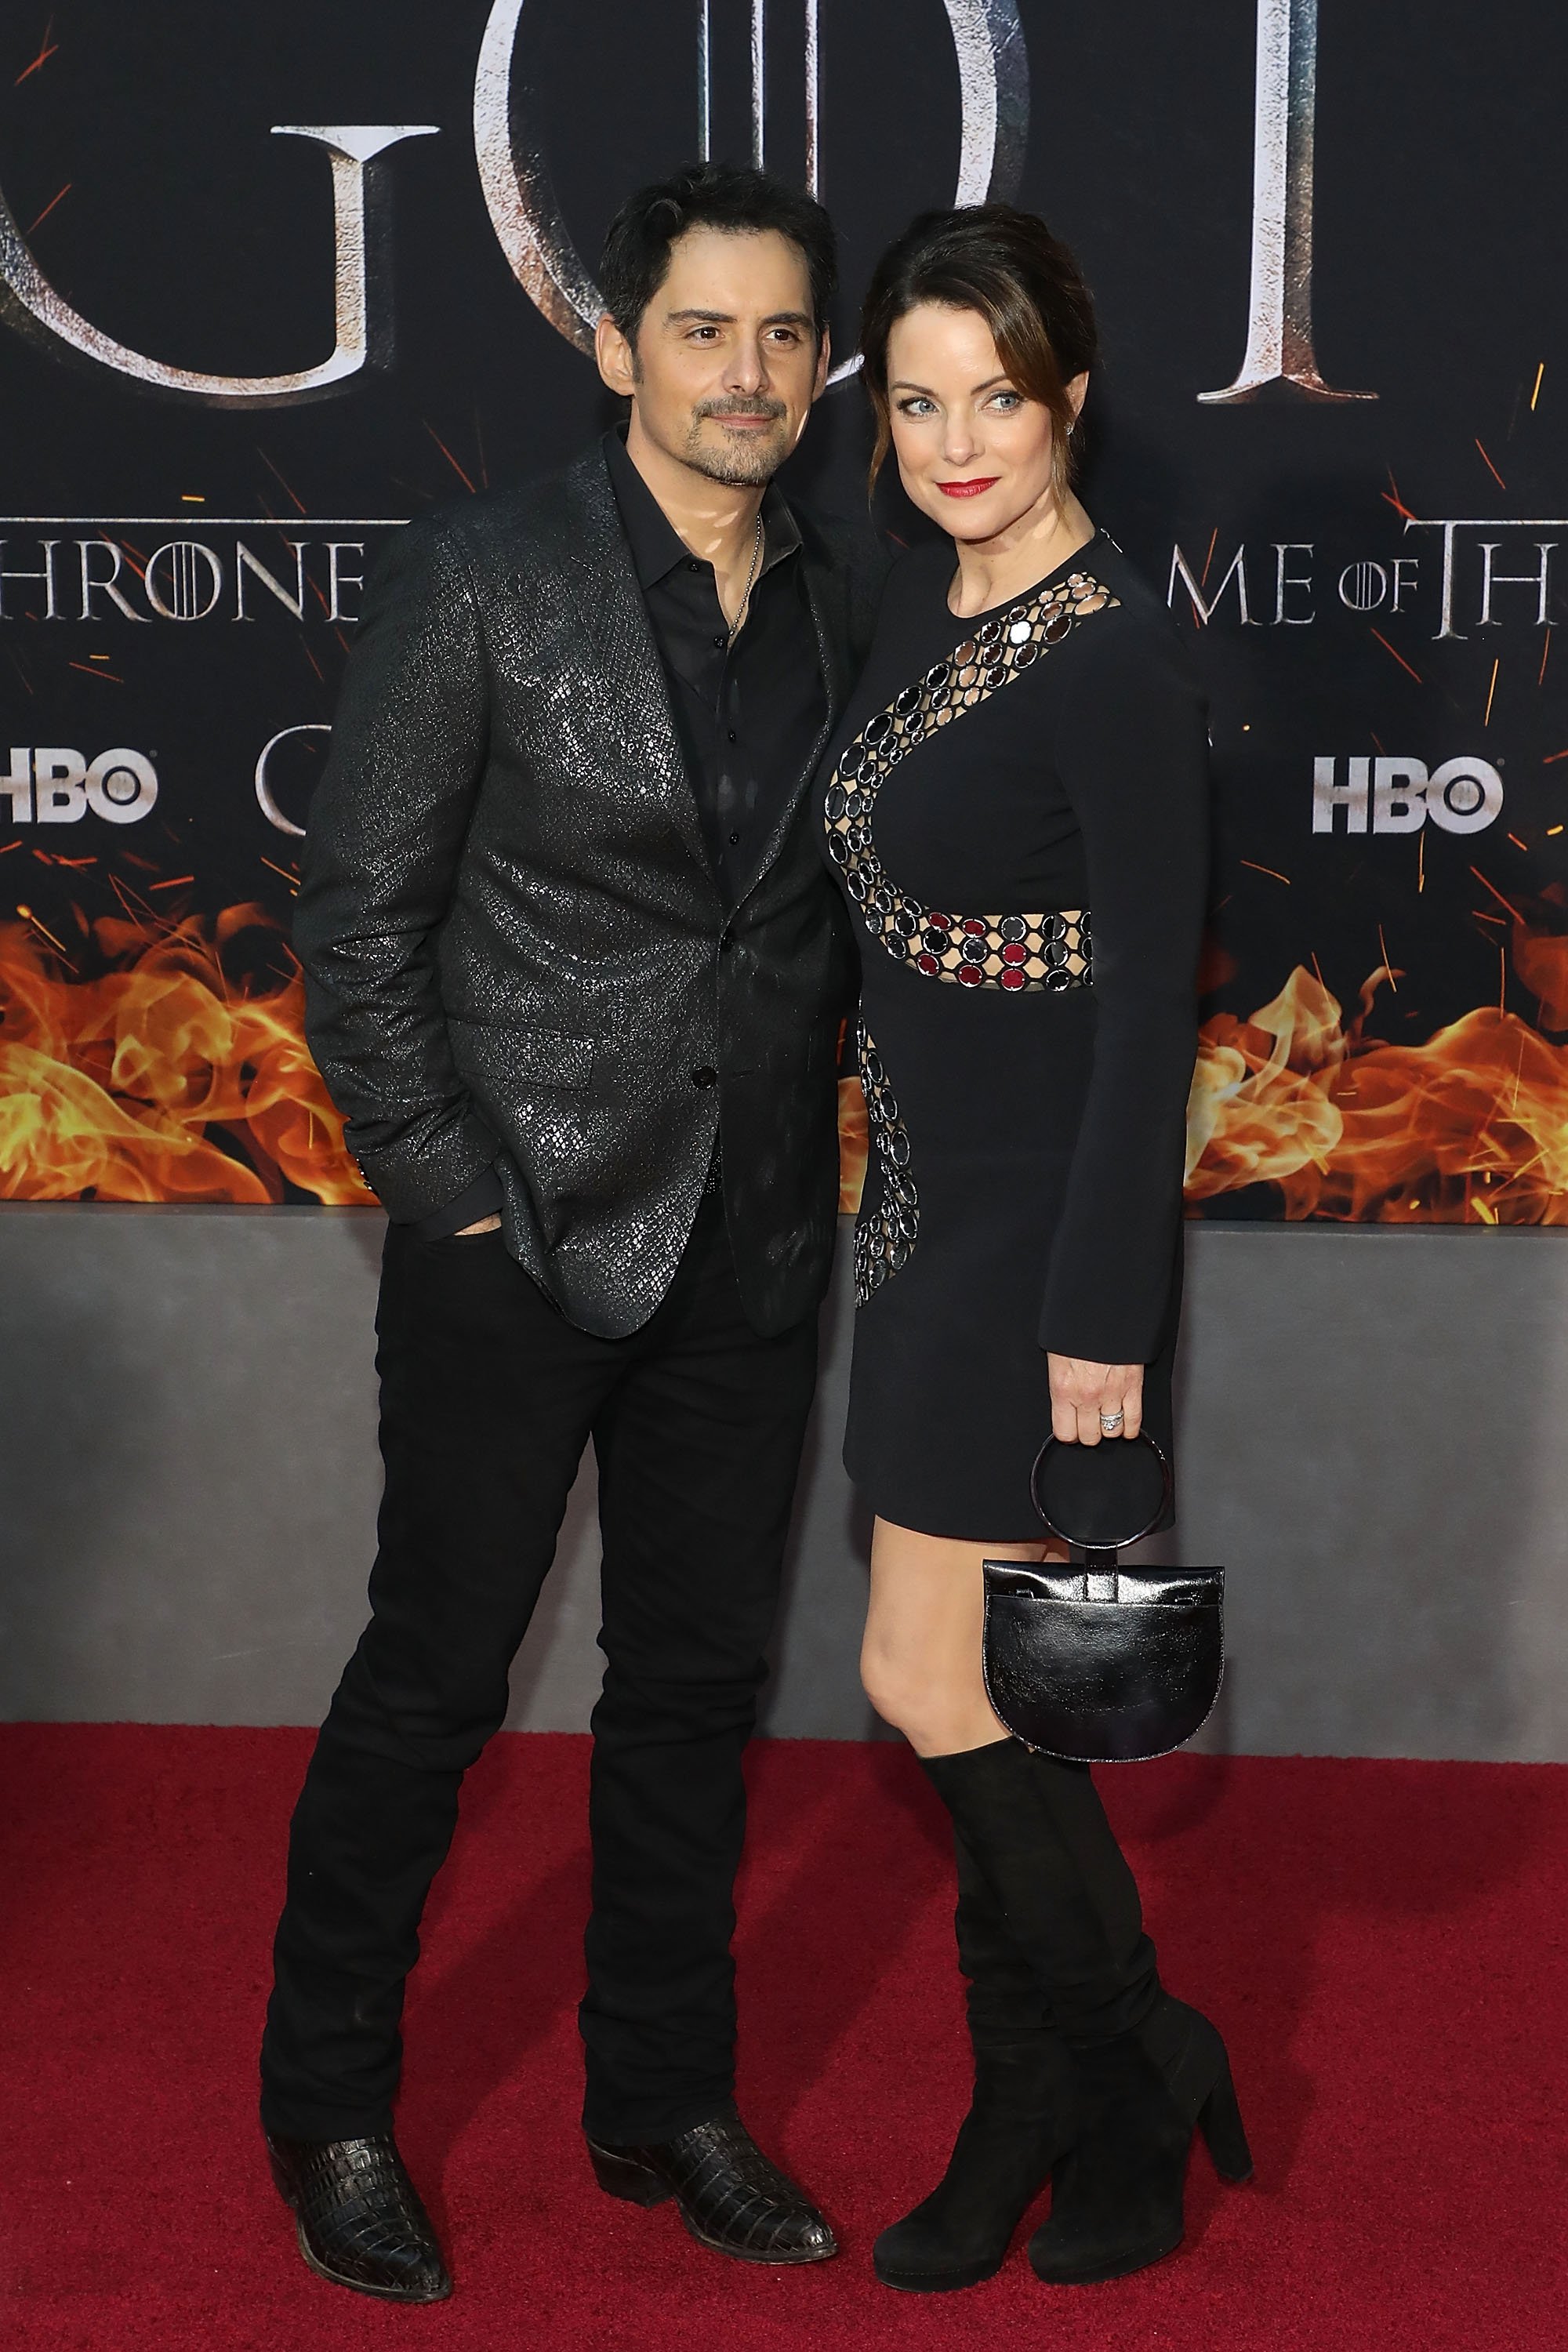 Brad Paisley and Kimberly Williams at the Season 8 premiere of "Game of Thrones" at Radio City Music Hall on April 3, 2019, in New York City. | Source: Getty Images